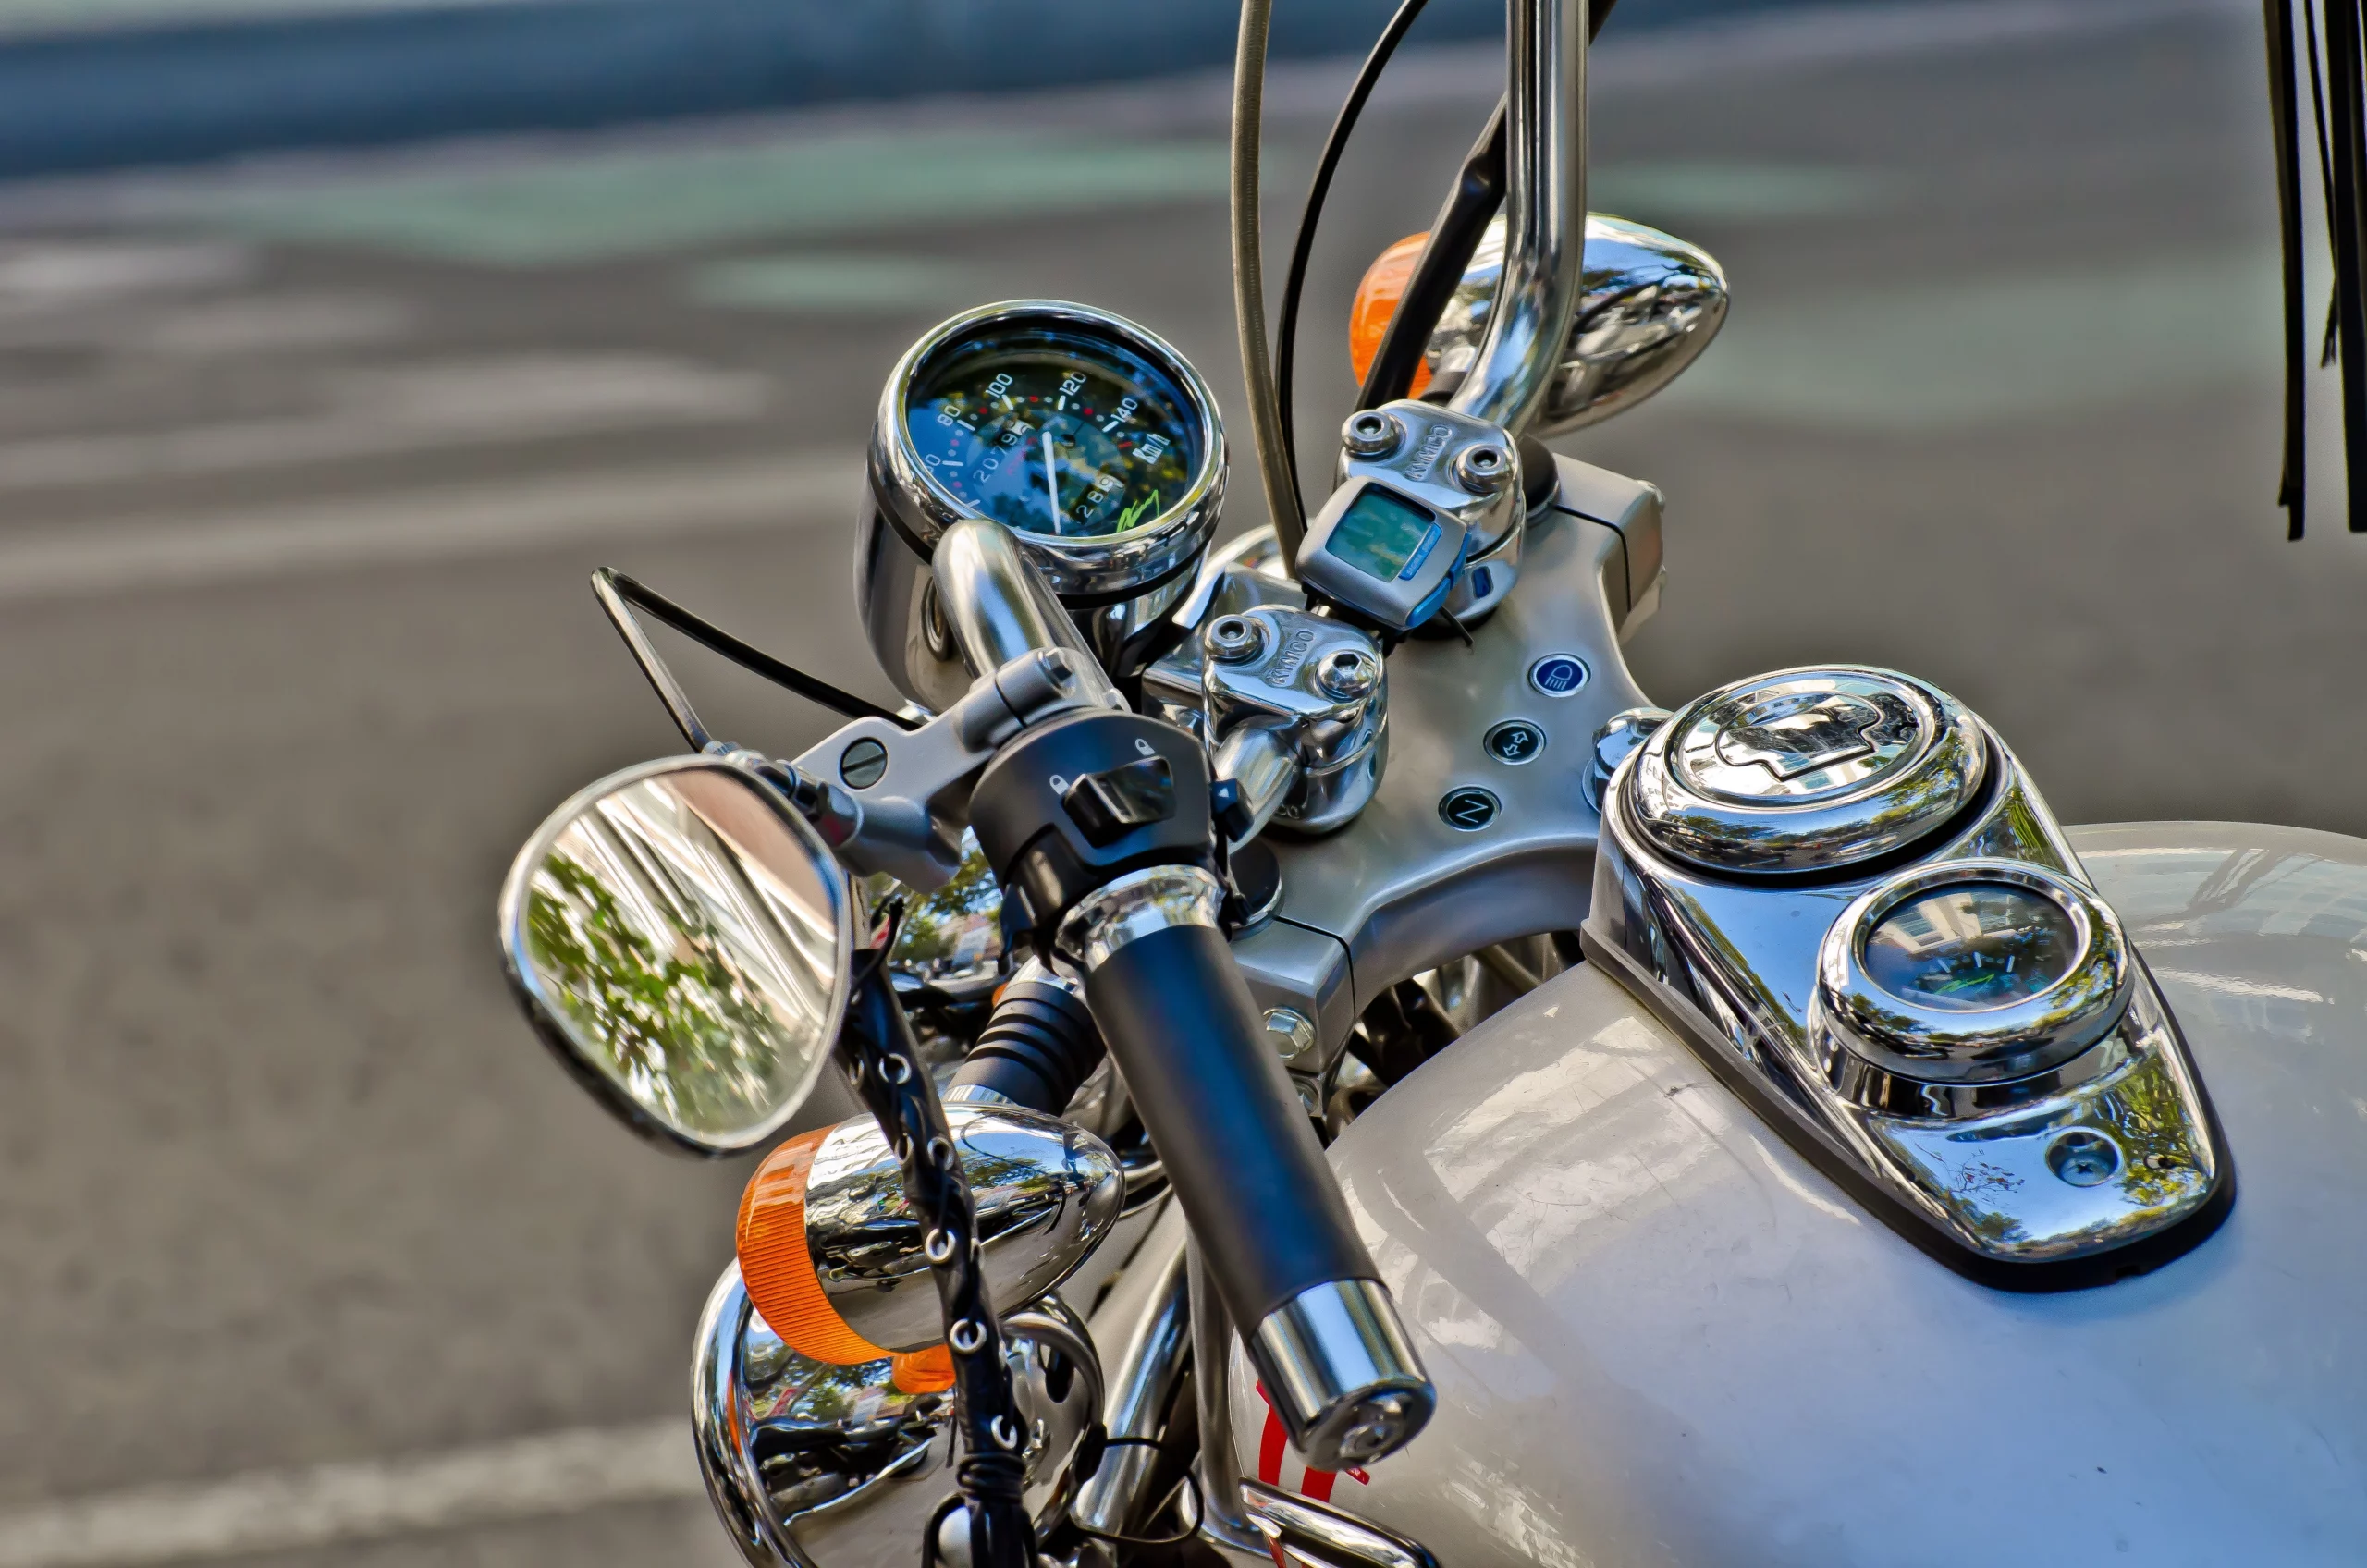 Motorcycle Accident Chest Injuries